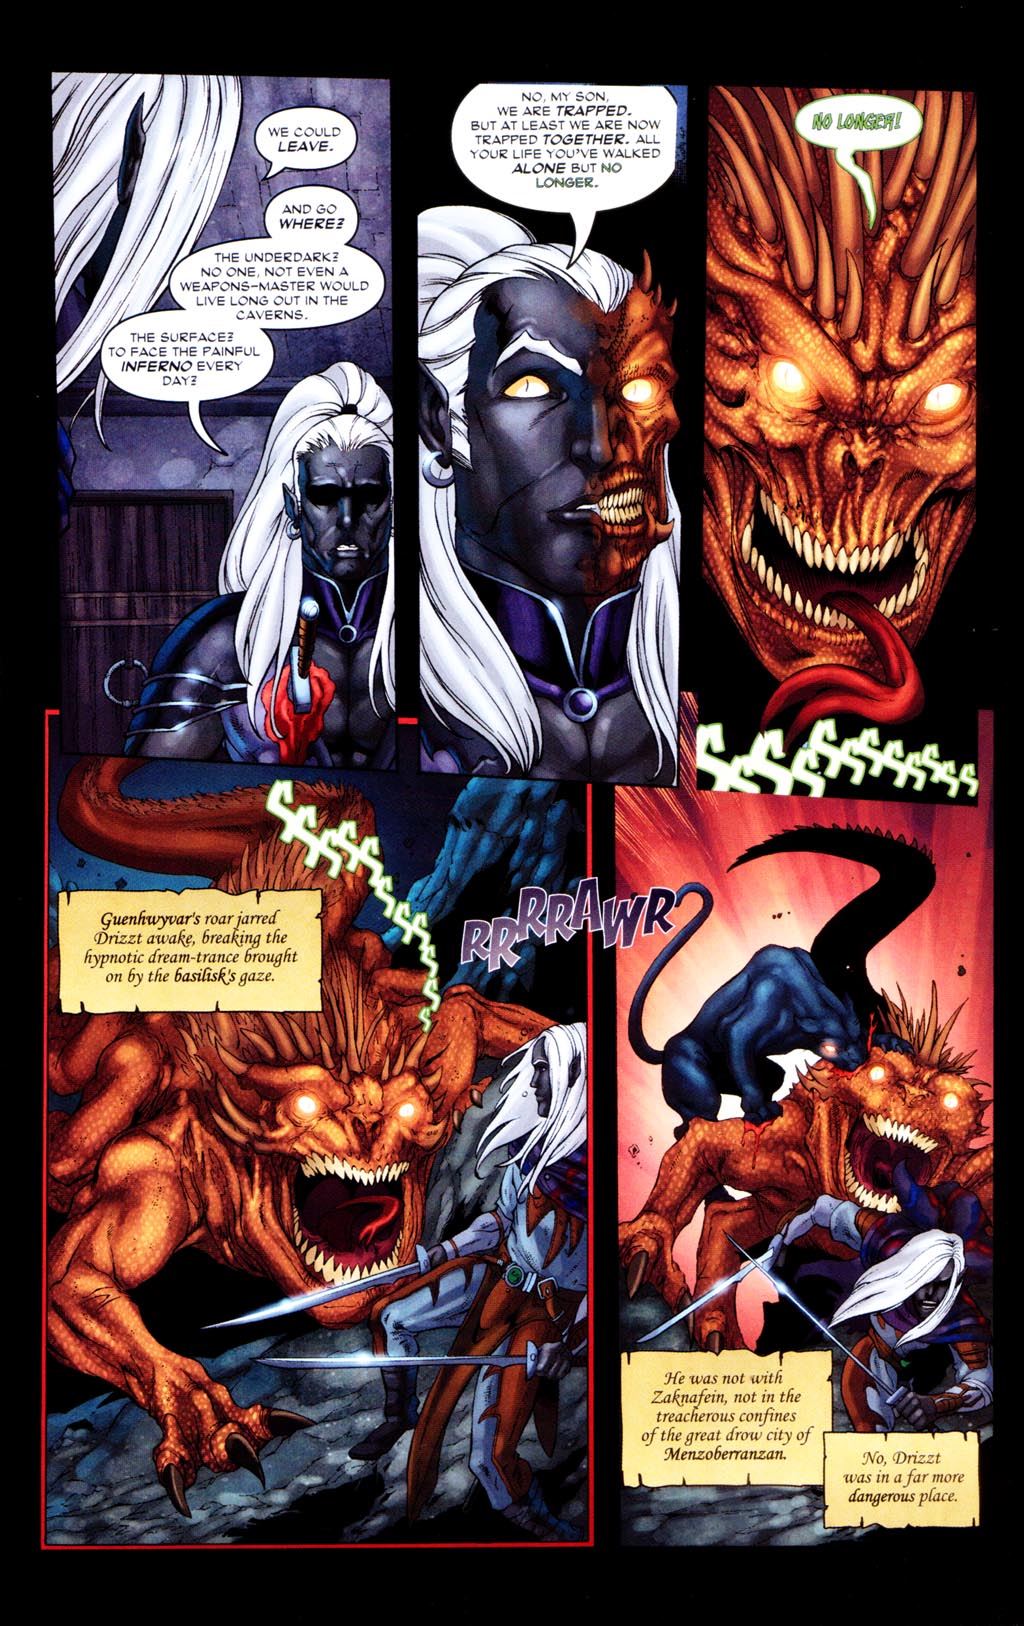 Forgotten Realms: Exile #1 - Issue #1, Part 1